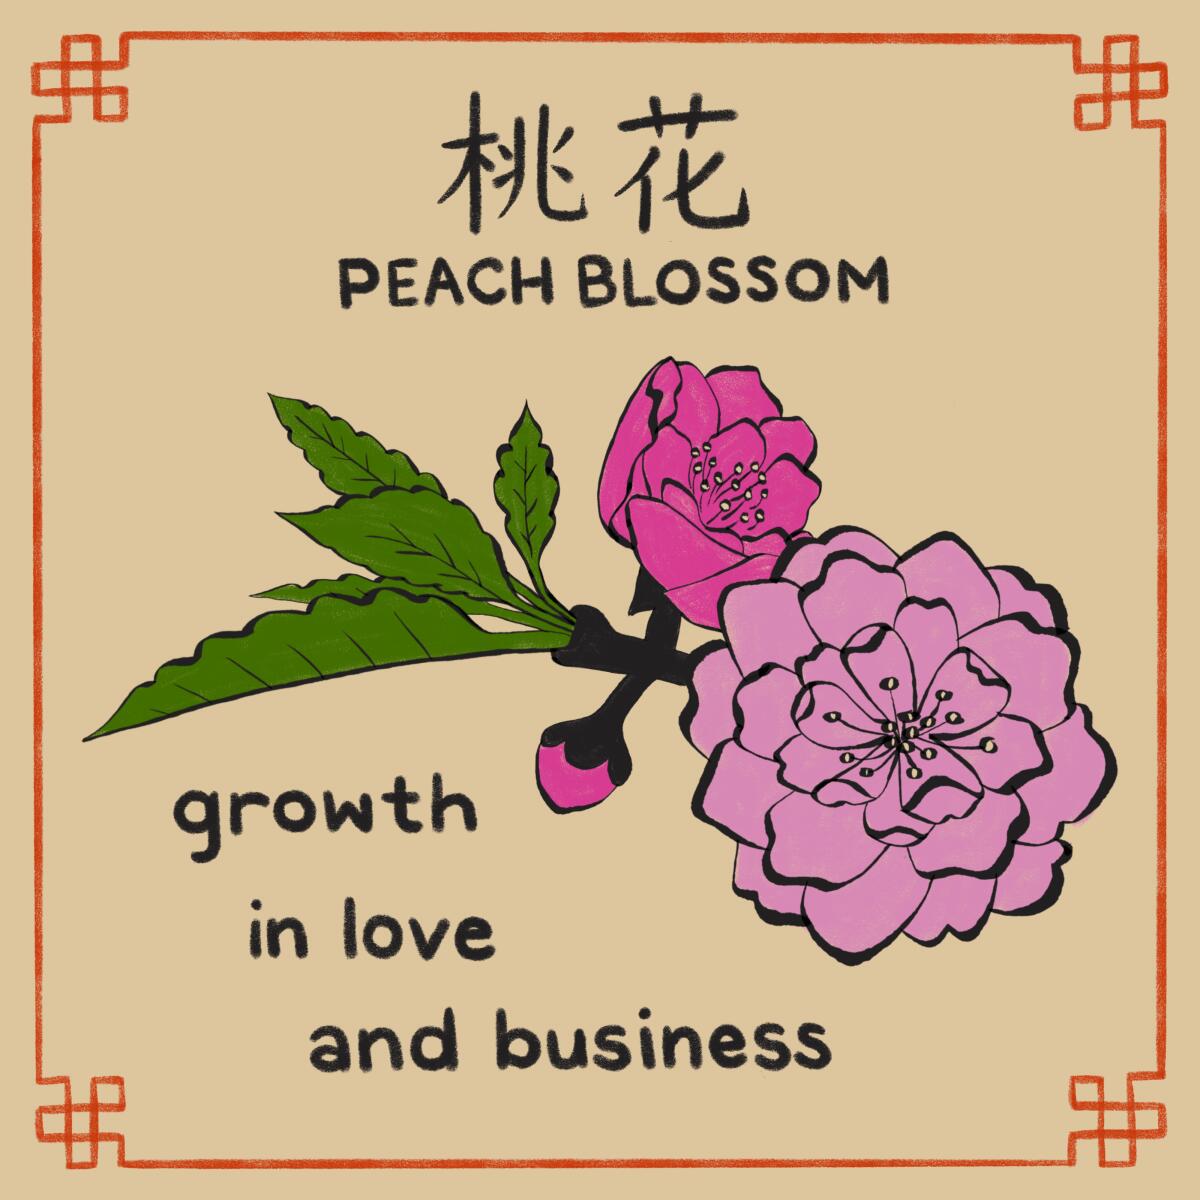 Illustration of pink Peach blossom with the words "growth in love and business"